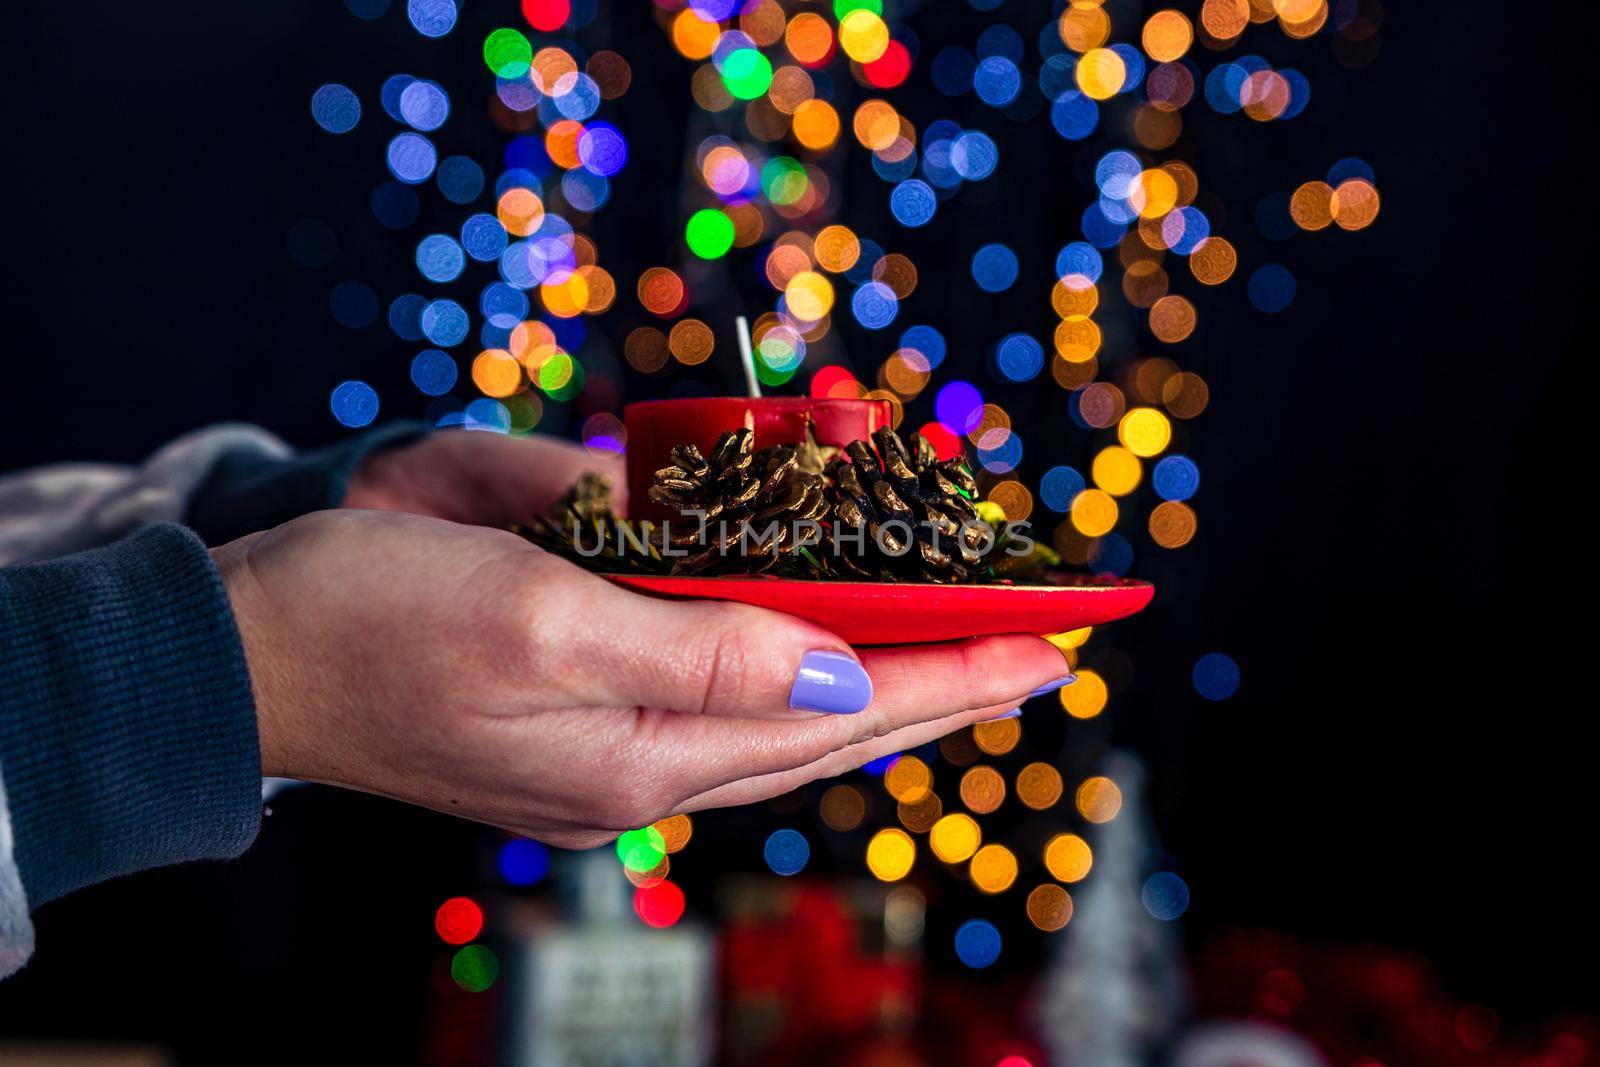 Holding Christmas decorated candle isolated on background with blurred lights. December season, Christmas composition.